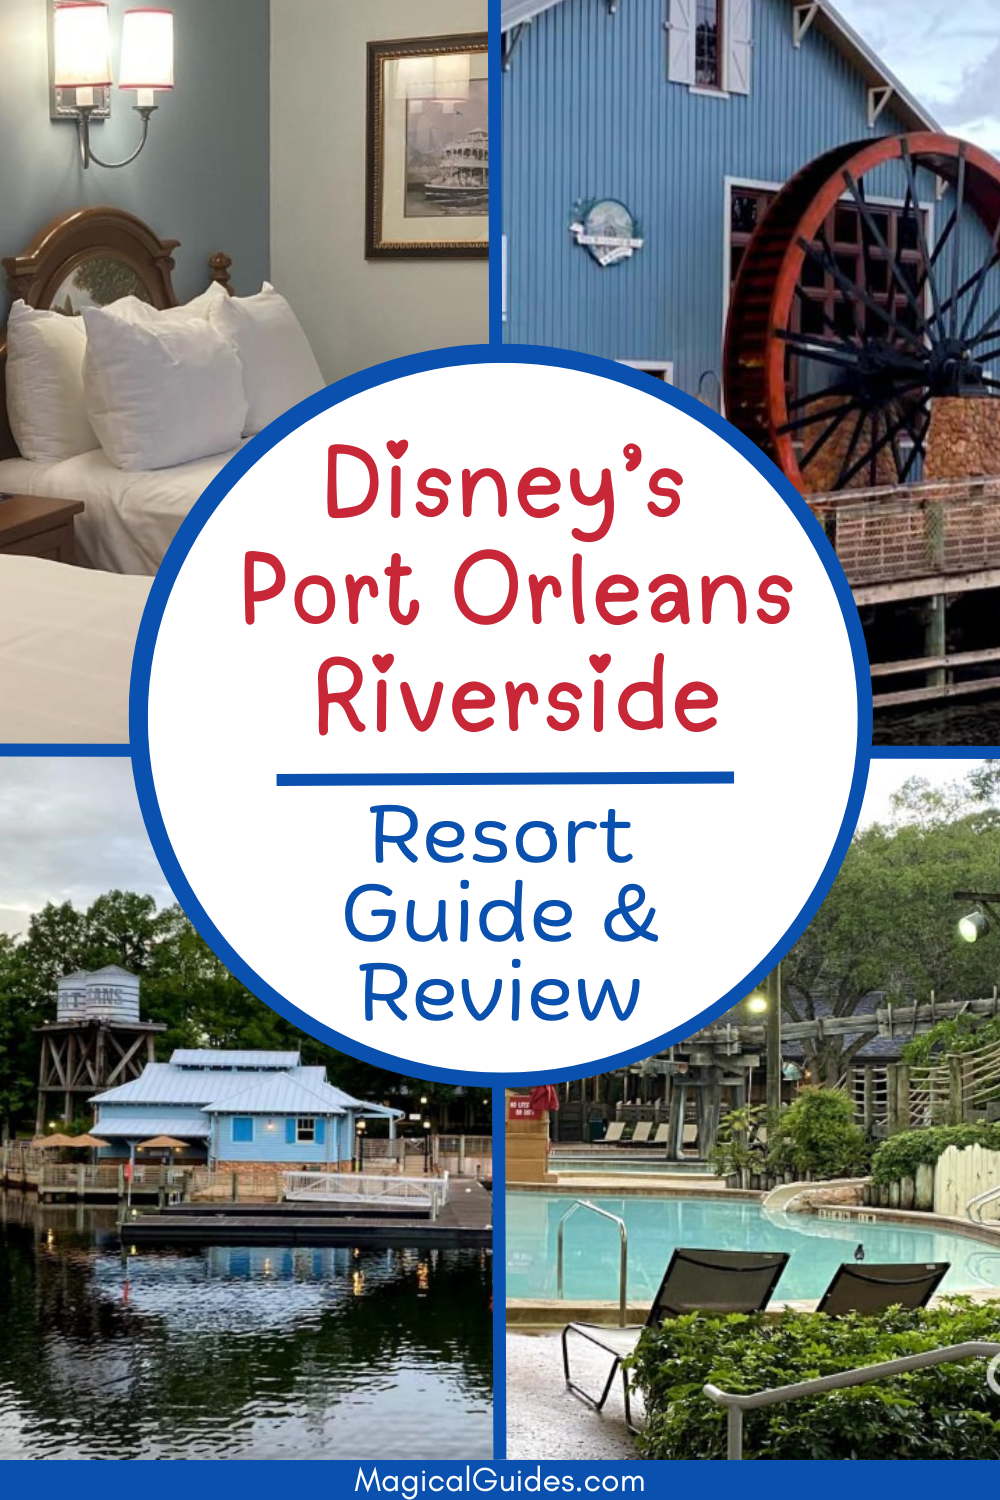 Everything you need to know about Disney's Port Orleans Riverside Resort. Don't miss out on any of the fun amenities or activities you may not know about this family friendly resort. Bring your dog along with you to this pet friendly Disney resort.